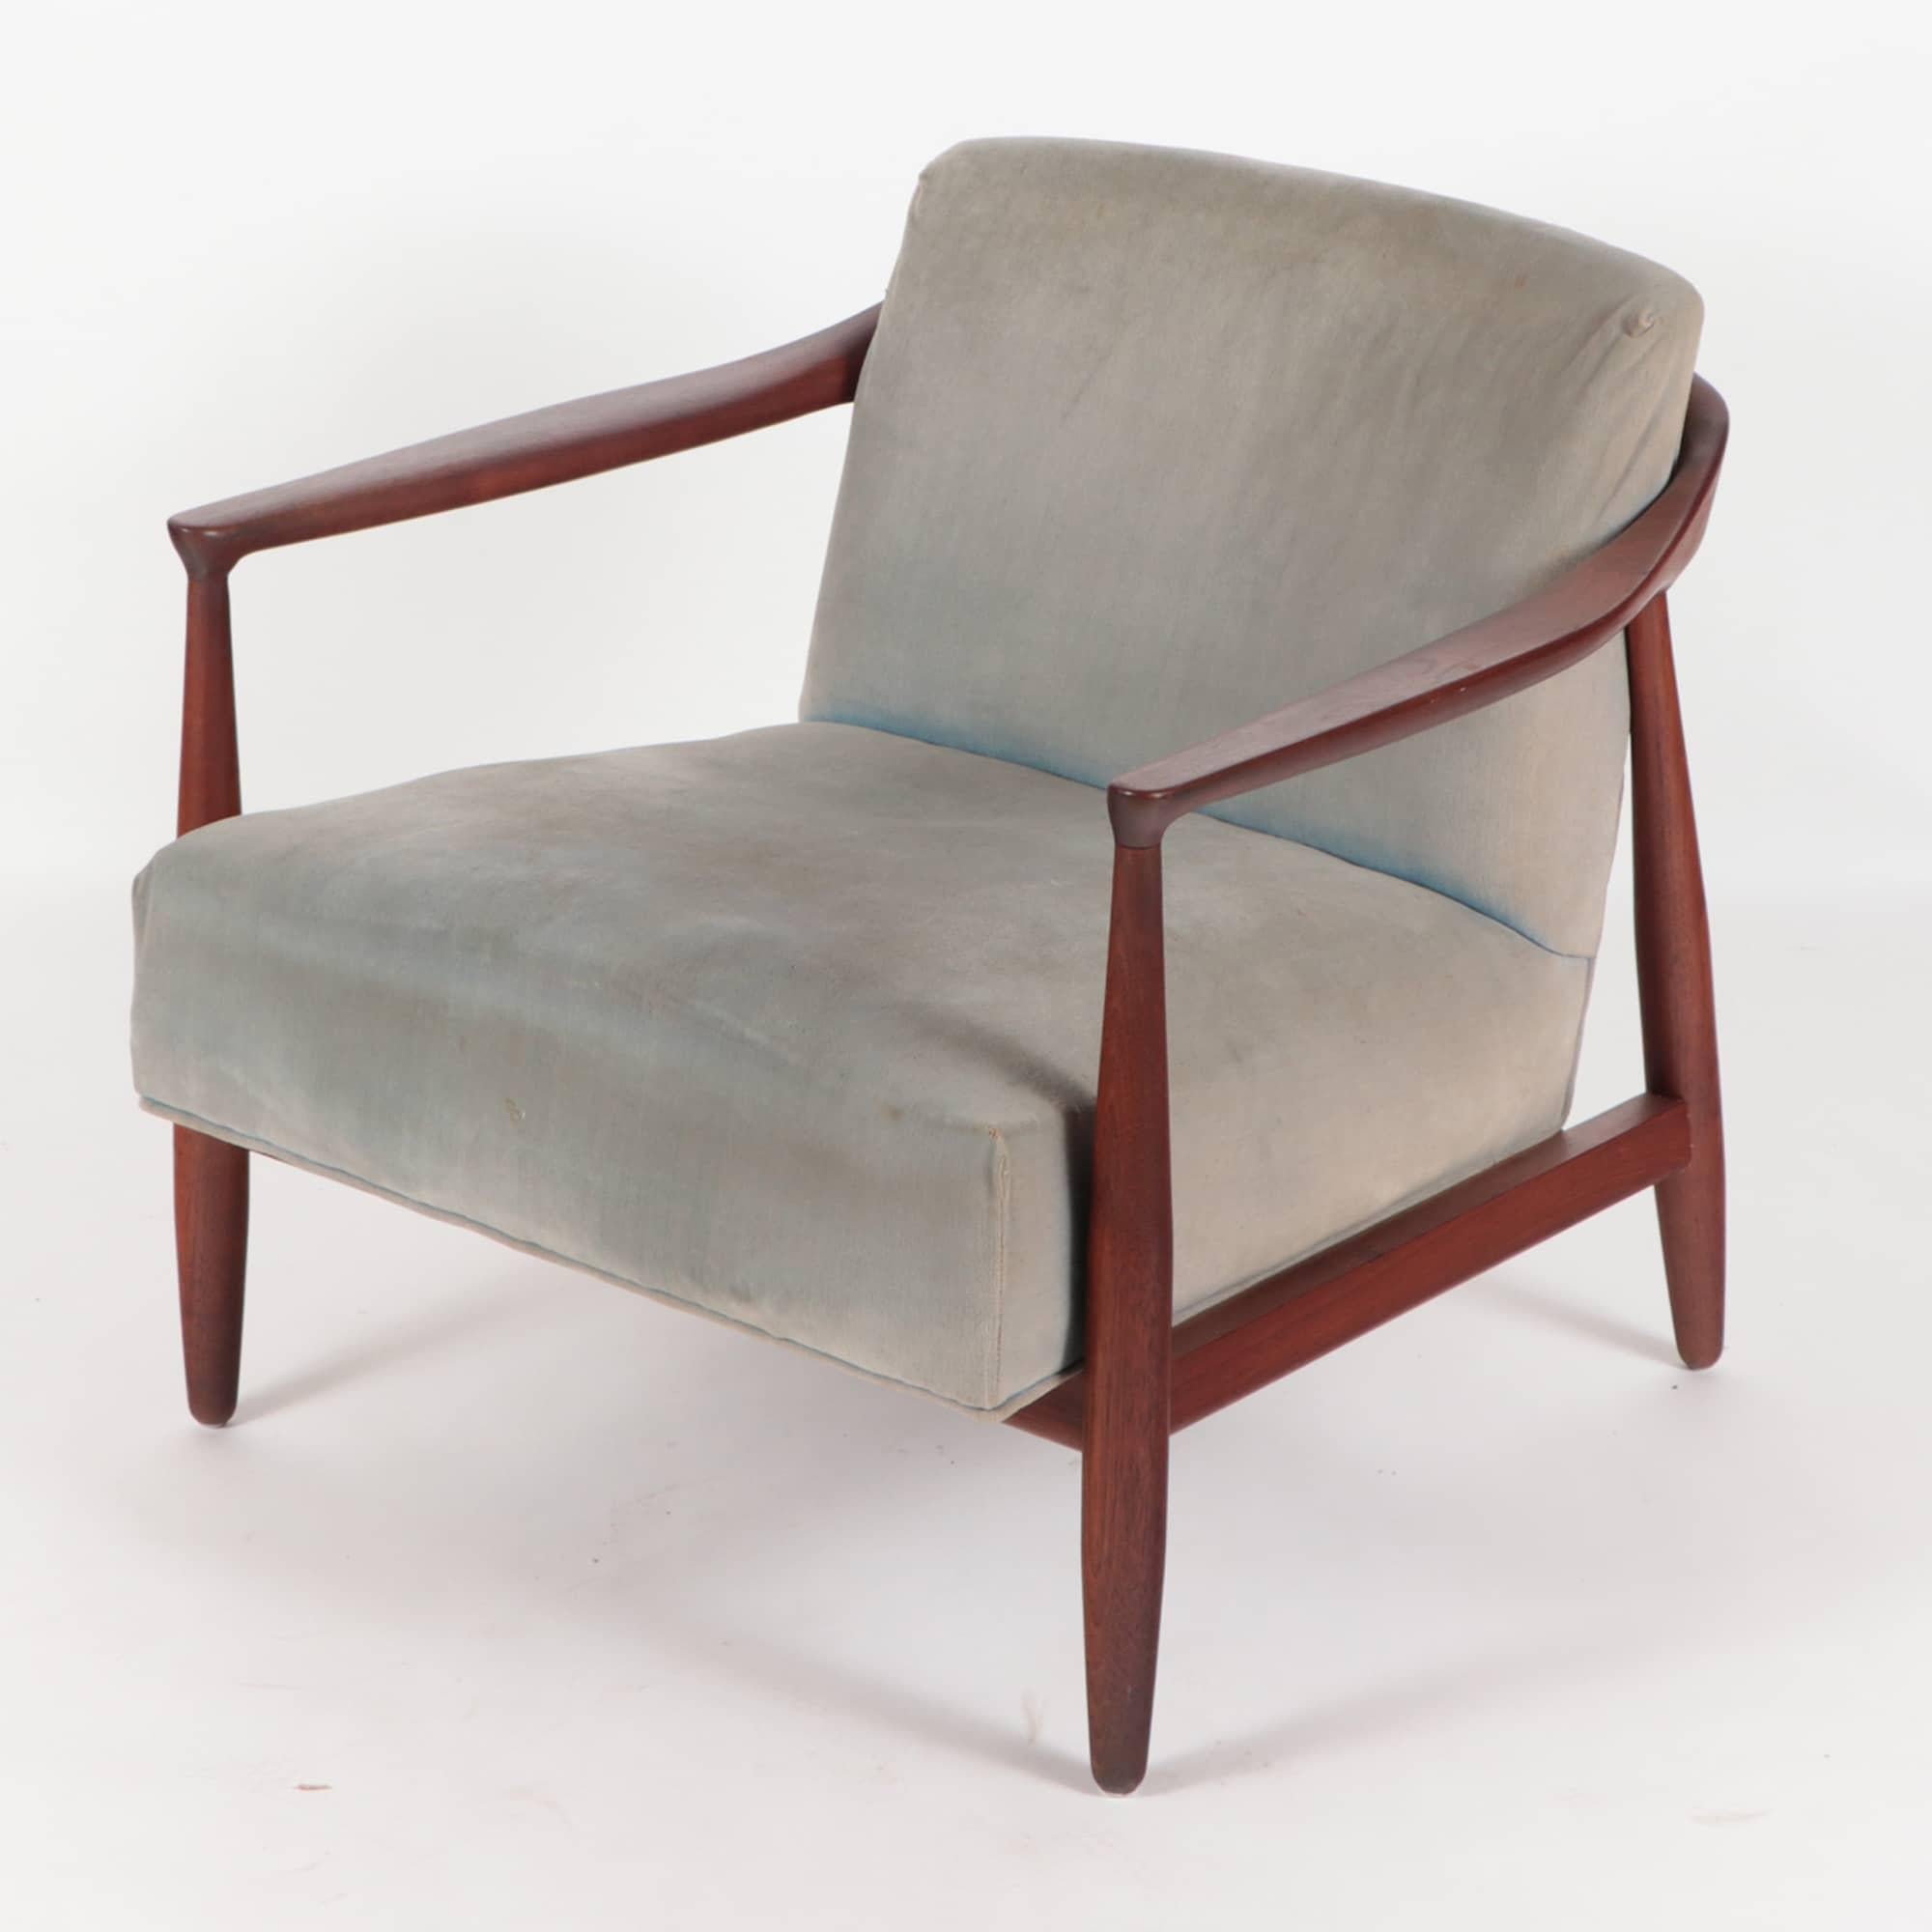 A beautiful set of two lounge chairs with exceptional lines, a low profile design and very well built. Designed by Erwin-Lambeth for Tomlinson in the 1950s. Mahogany frame.